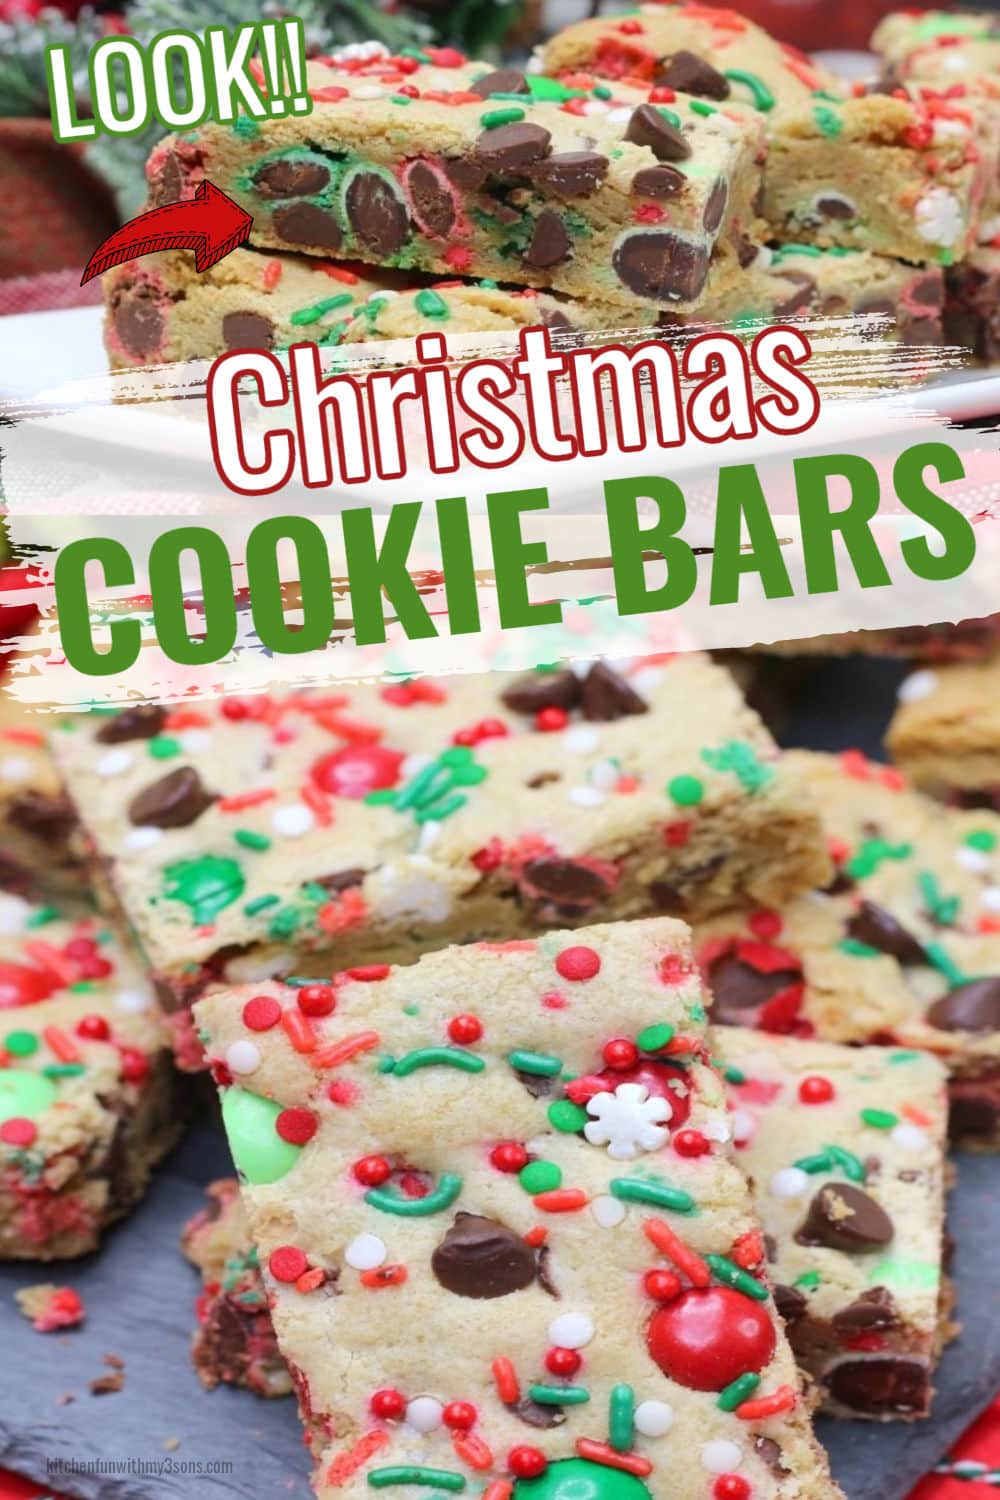 Christmas Cookie Bars | Kitchen Fun With My 3 Sons